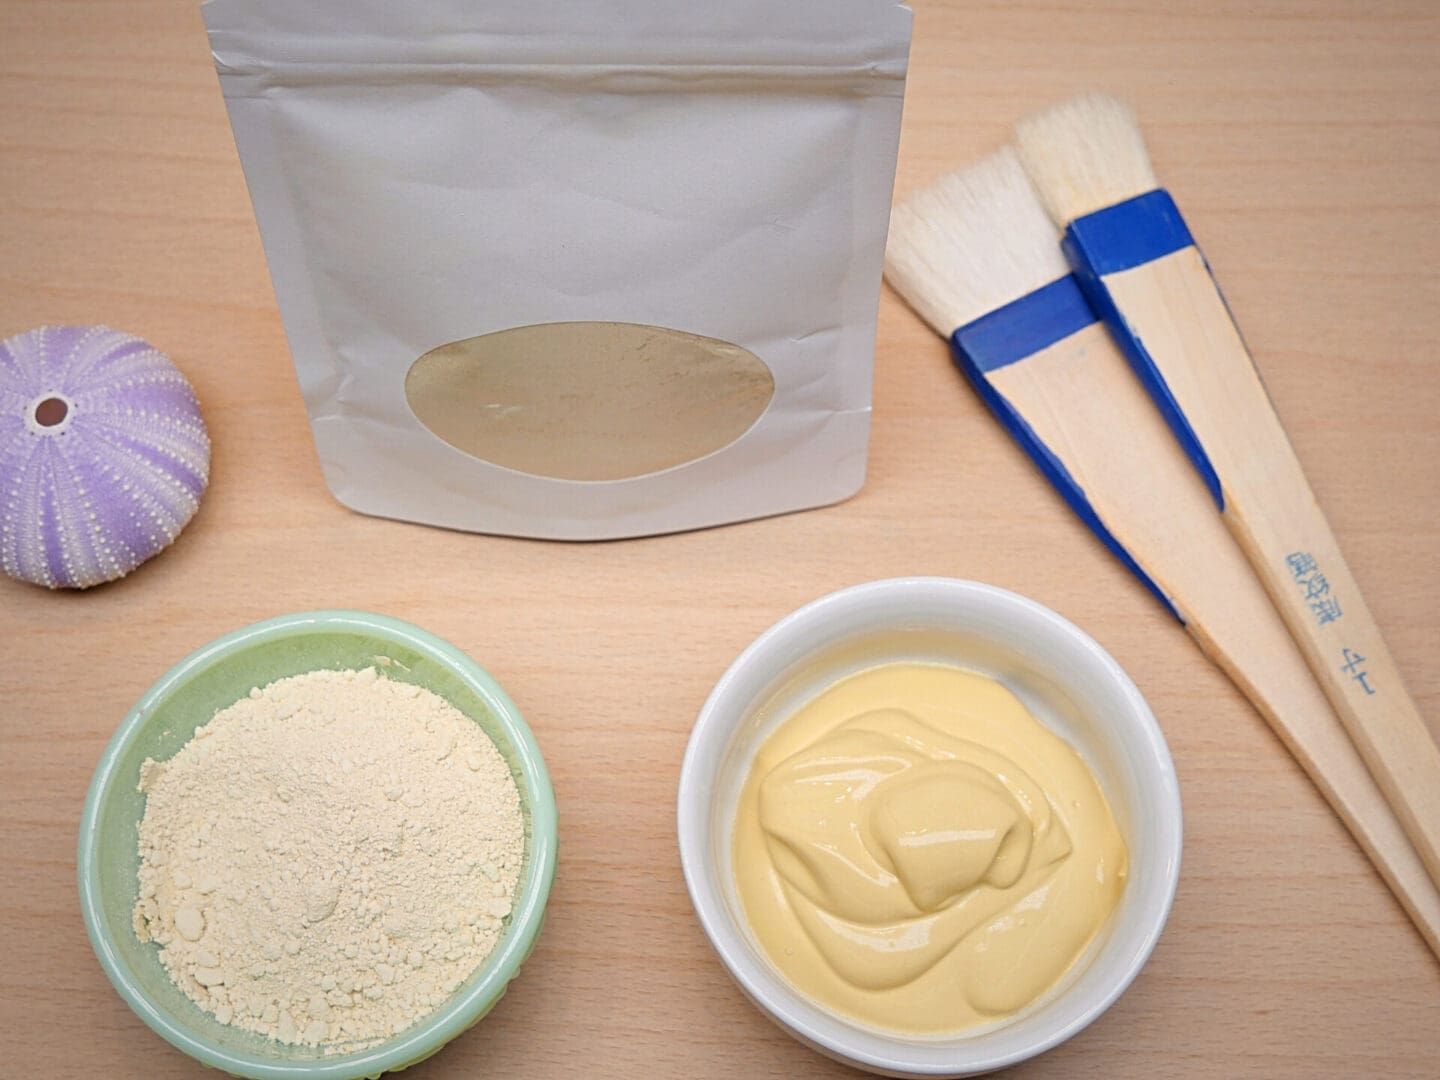 A bowl of Brazilian Yellow Clay Antioxidant Face Mask Powder, brushes, and a bag of powder.